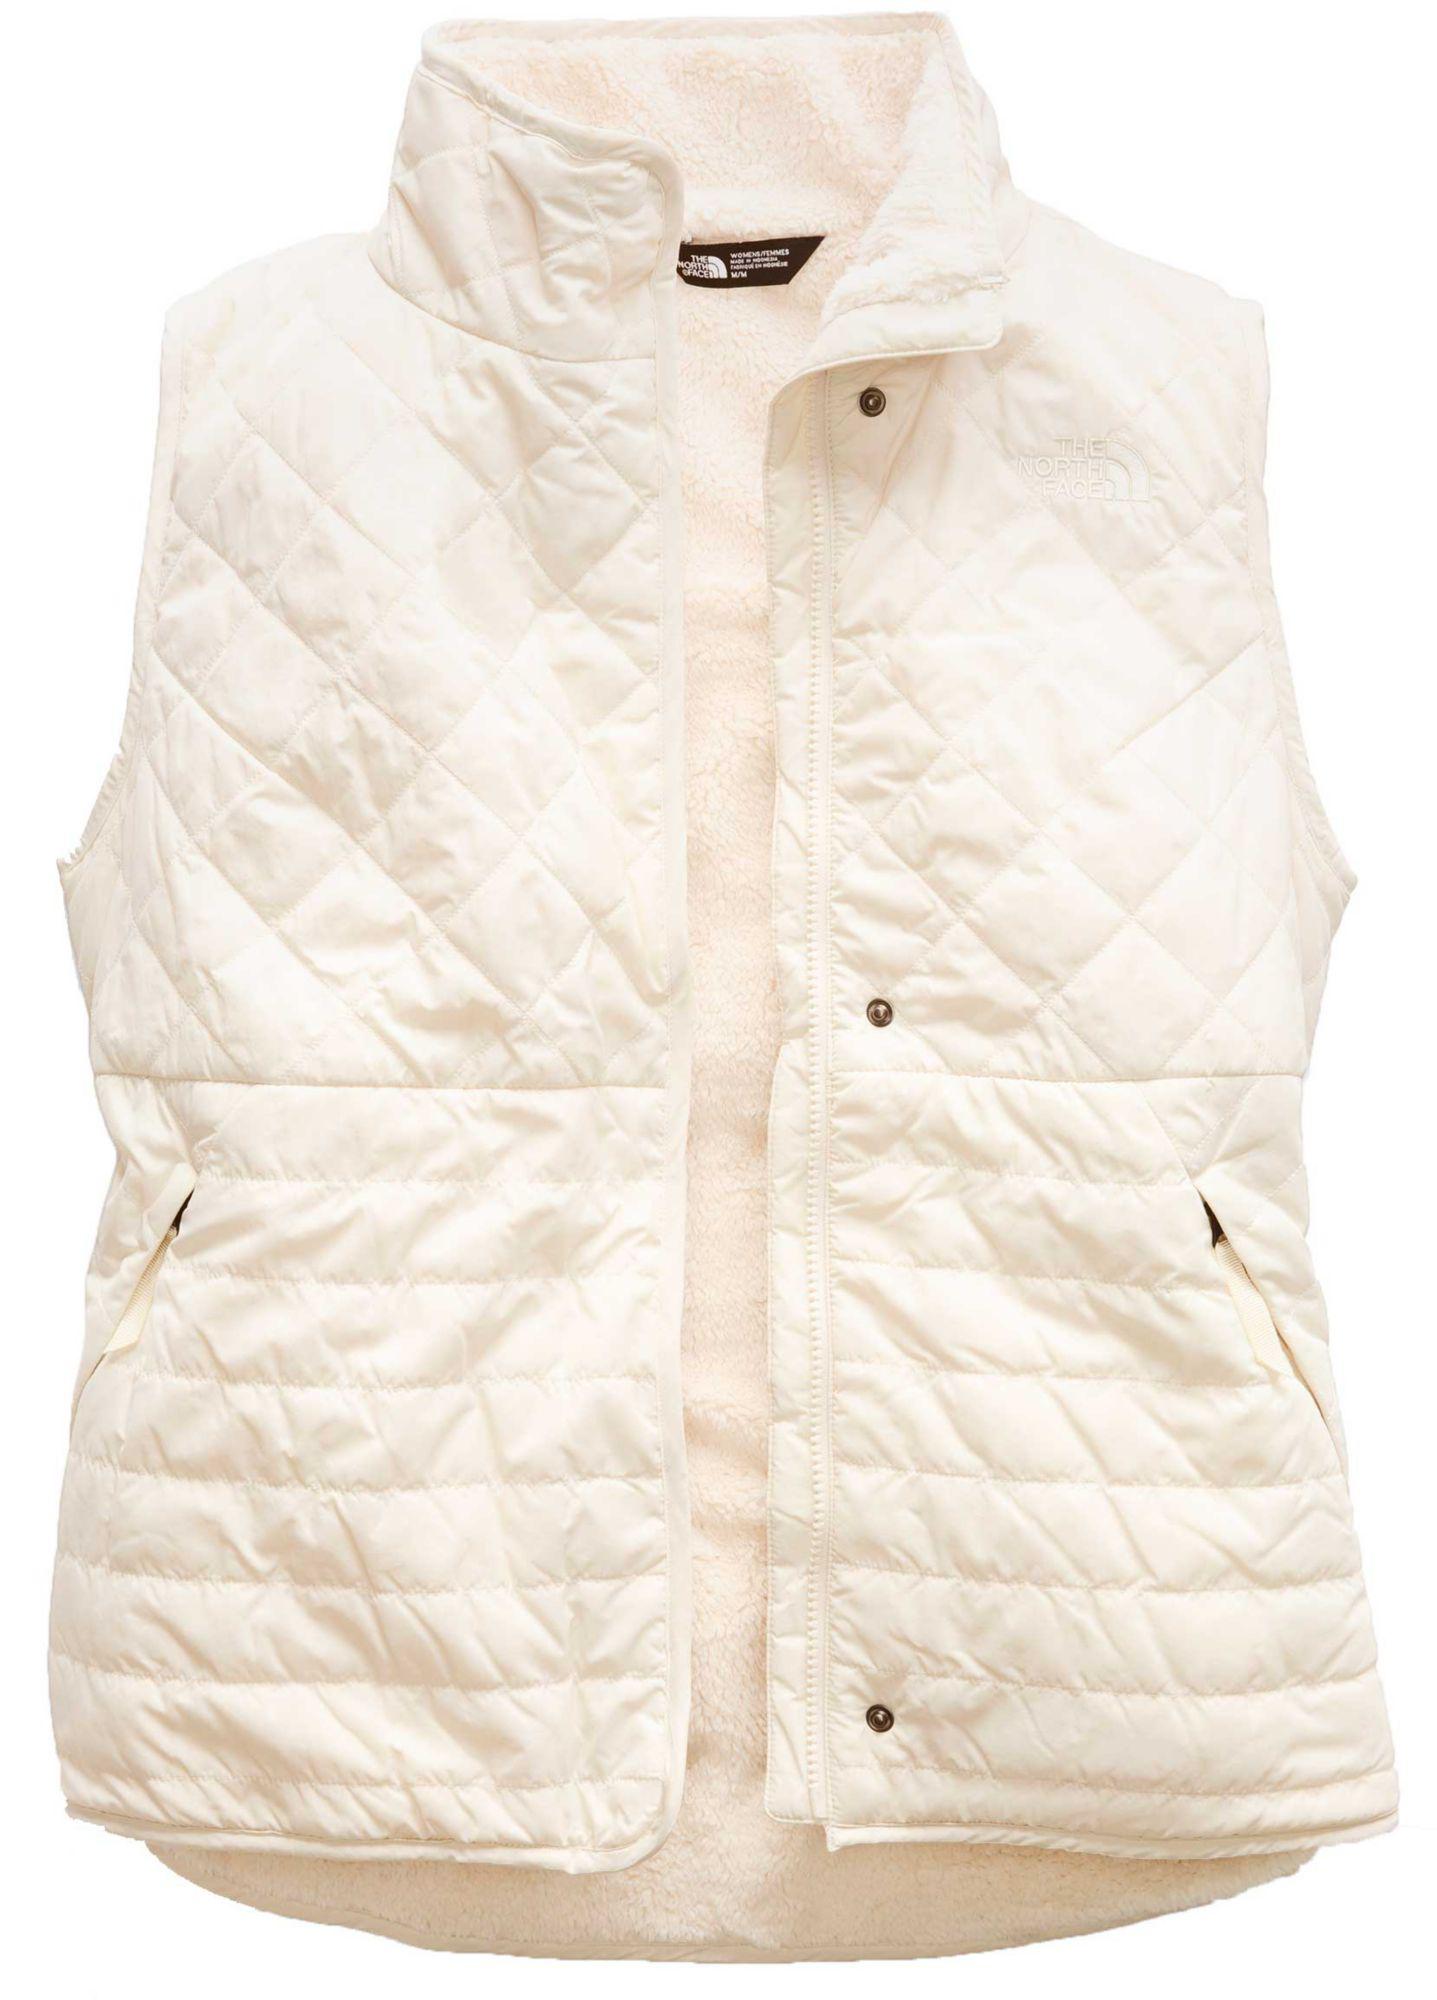 North Face Synthetic Rosie Sherpa Vest 